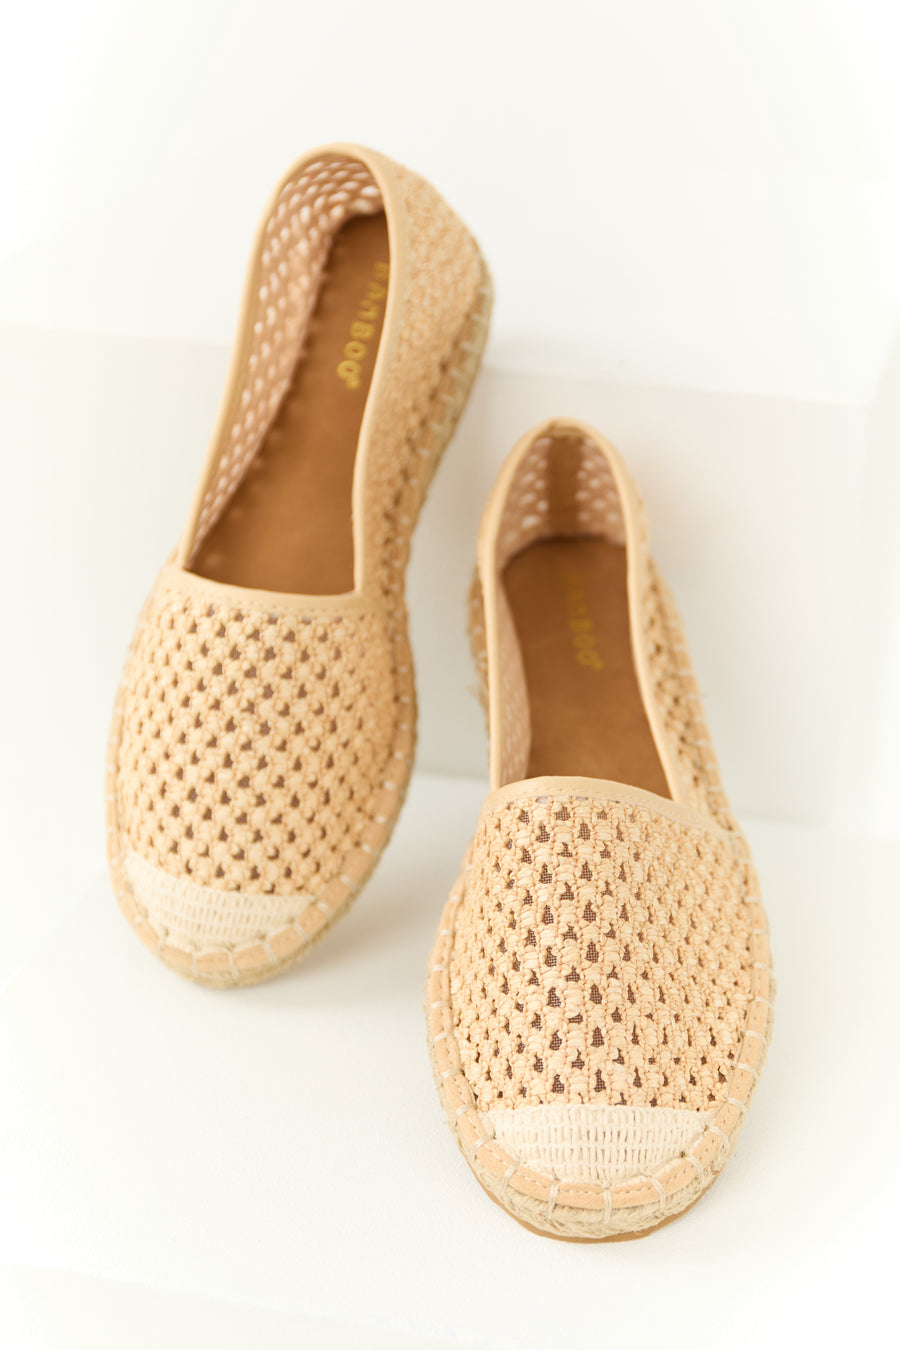 Peach Woven Rounded Toe Slip On Espadrilles